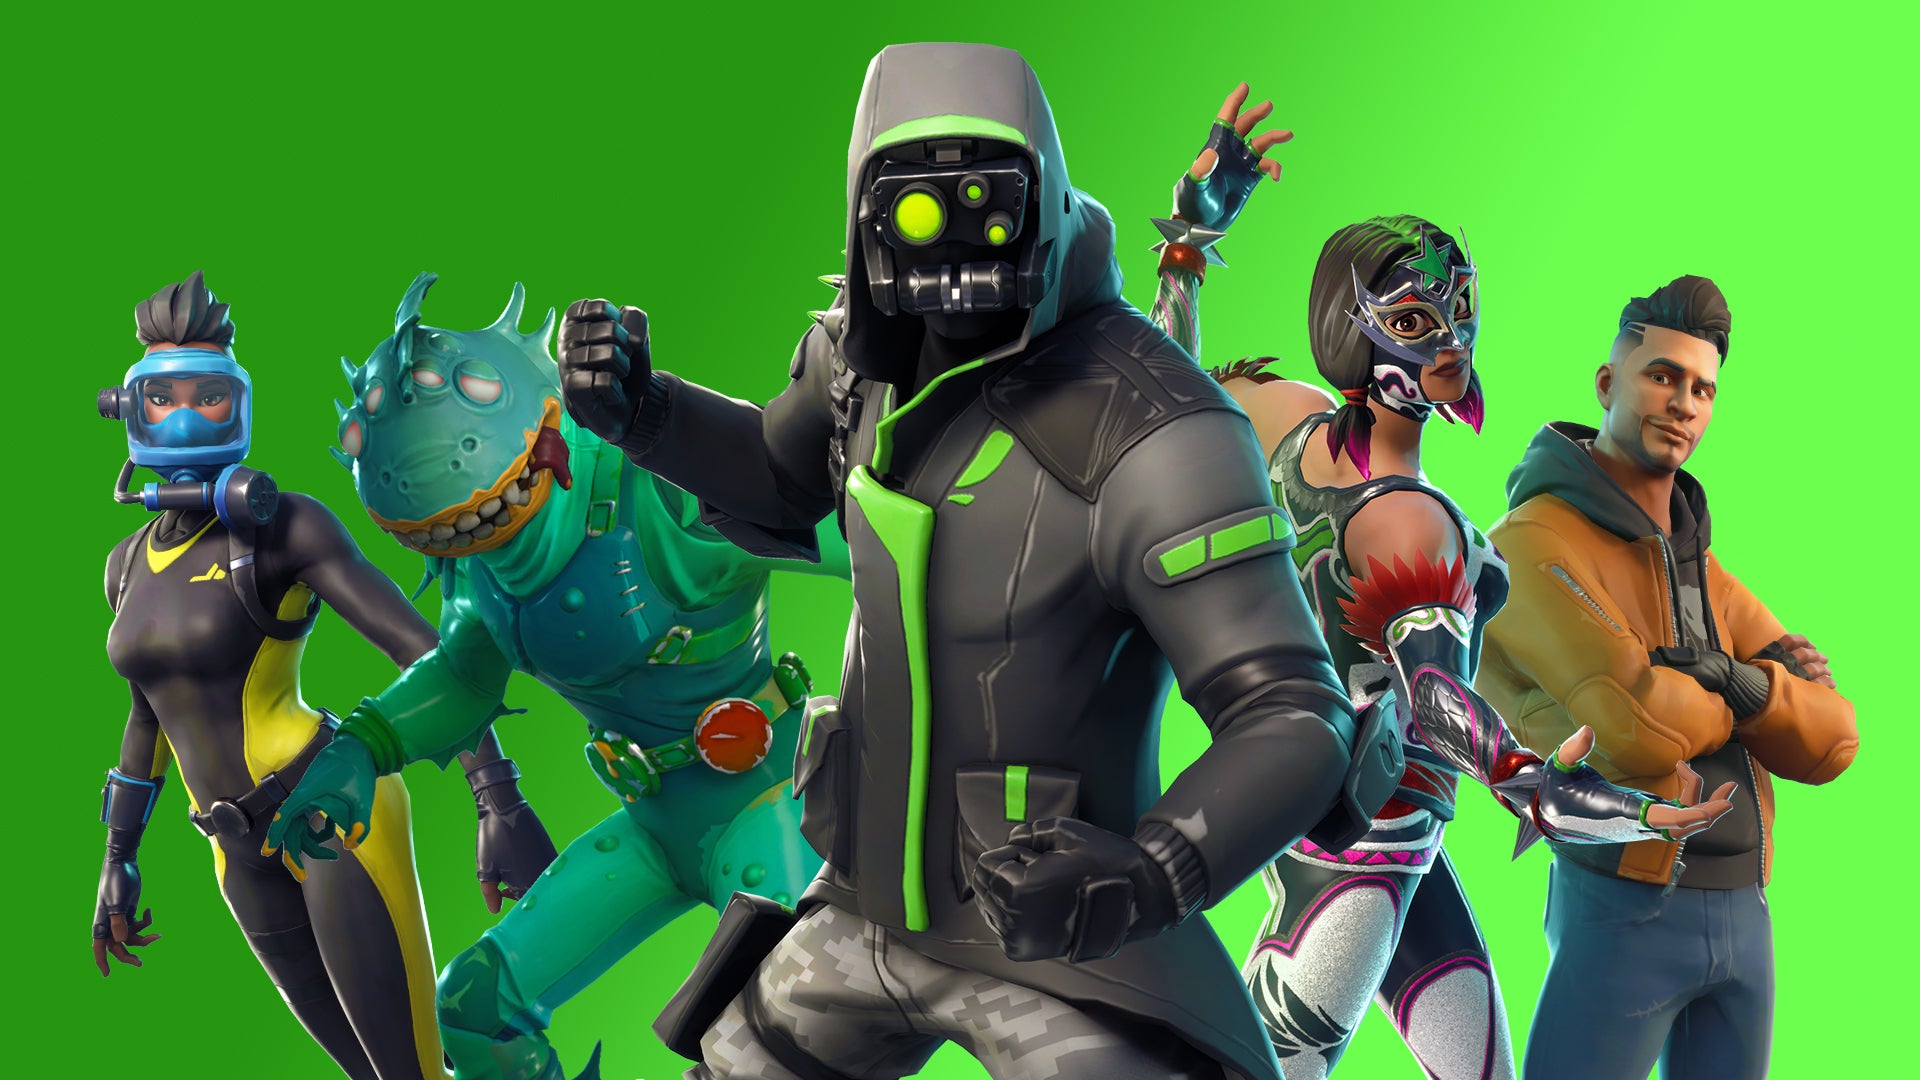 Image for Fortnite v8.10 update adds The Baller, The Getaway LTM, Wooden Lodge Creative theme and reduces number of player islands on each server